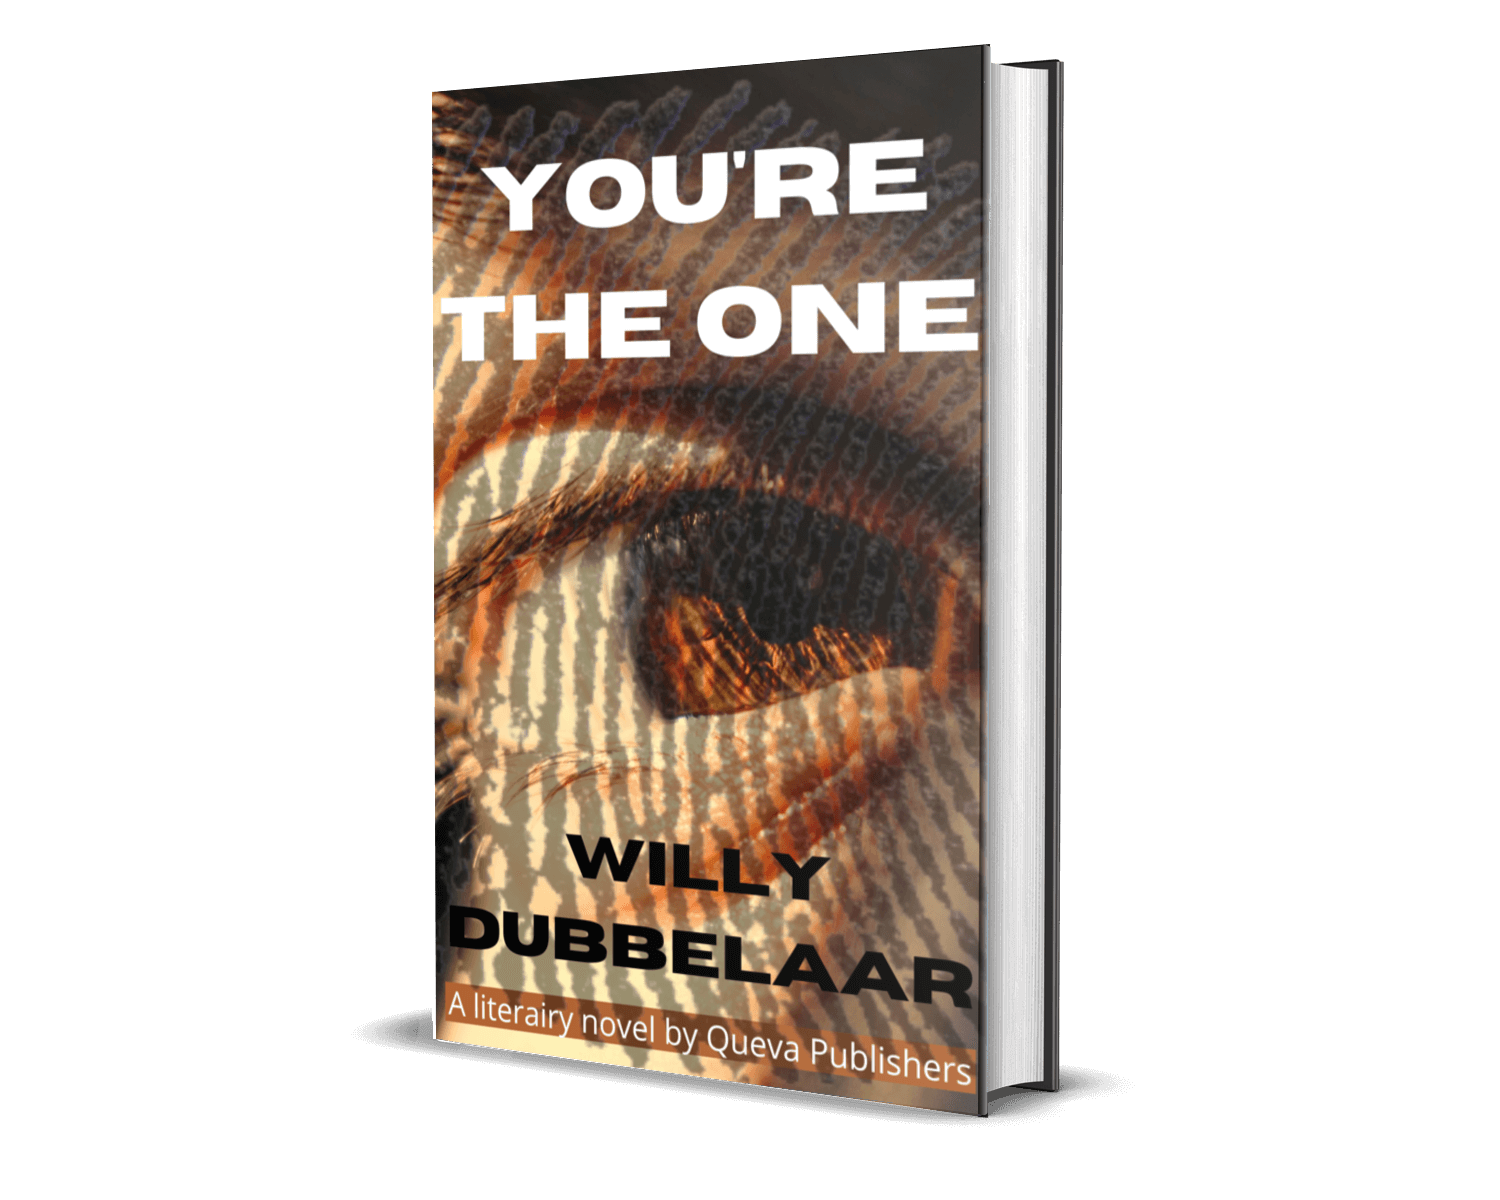 e-book Willy Dubbelaar - You're the one